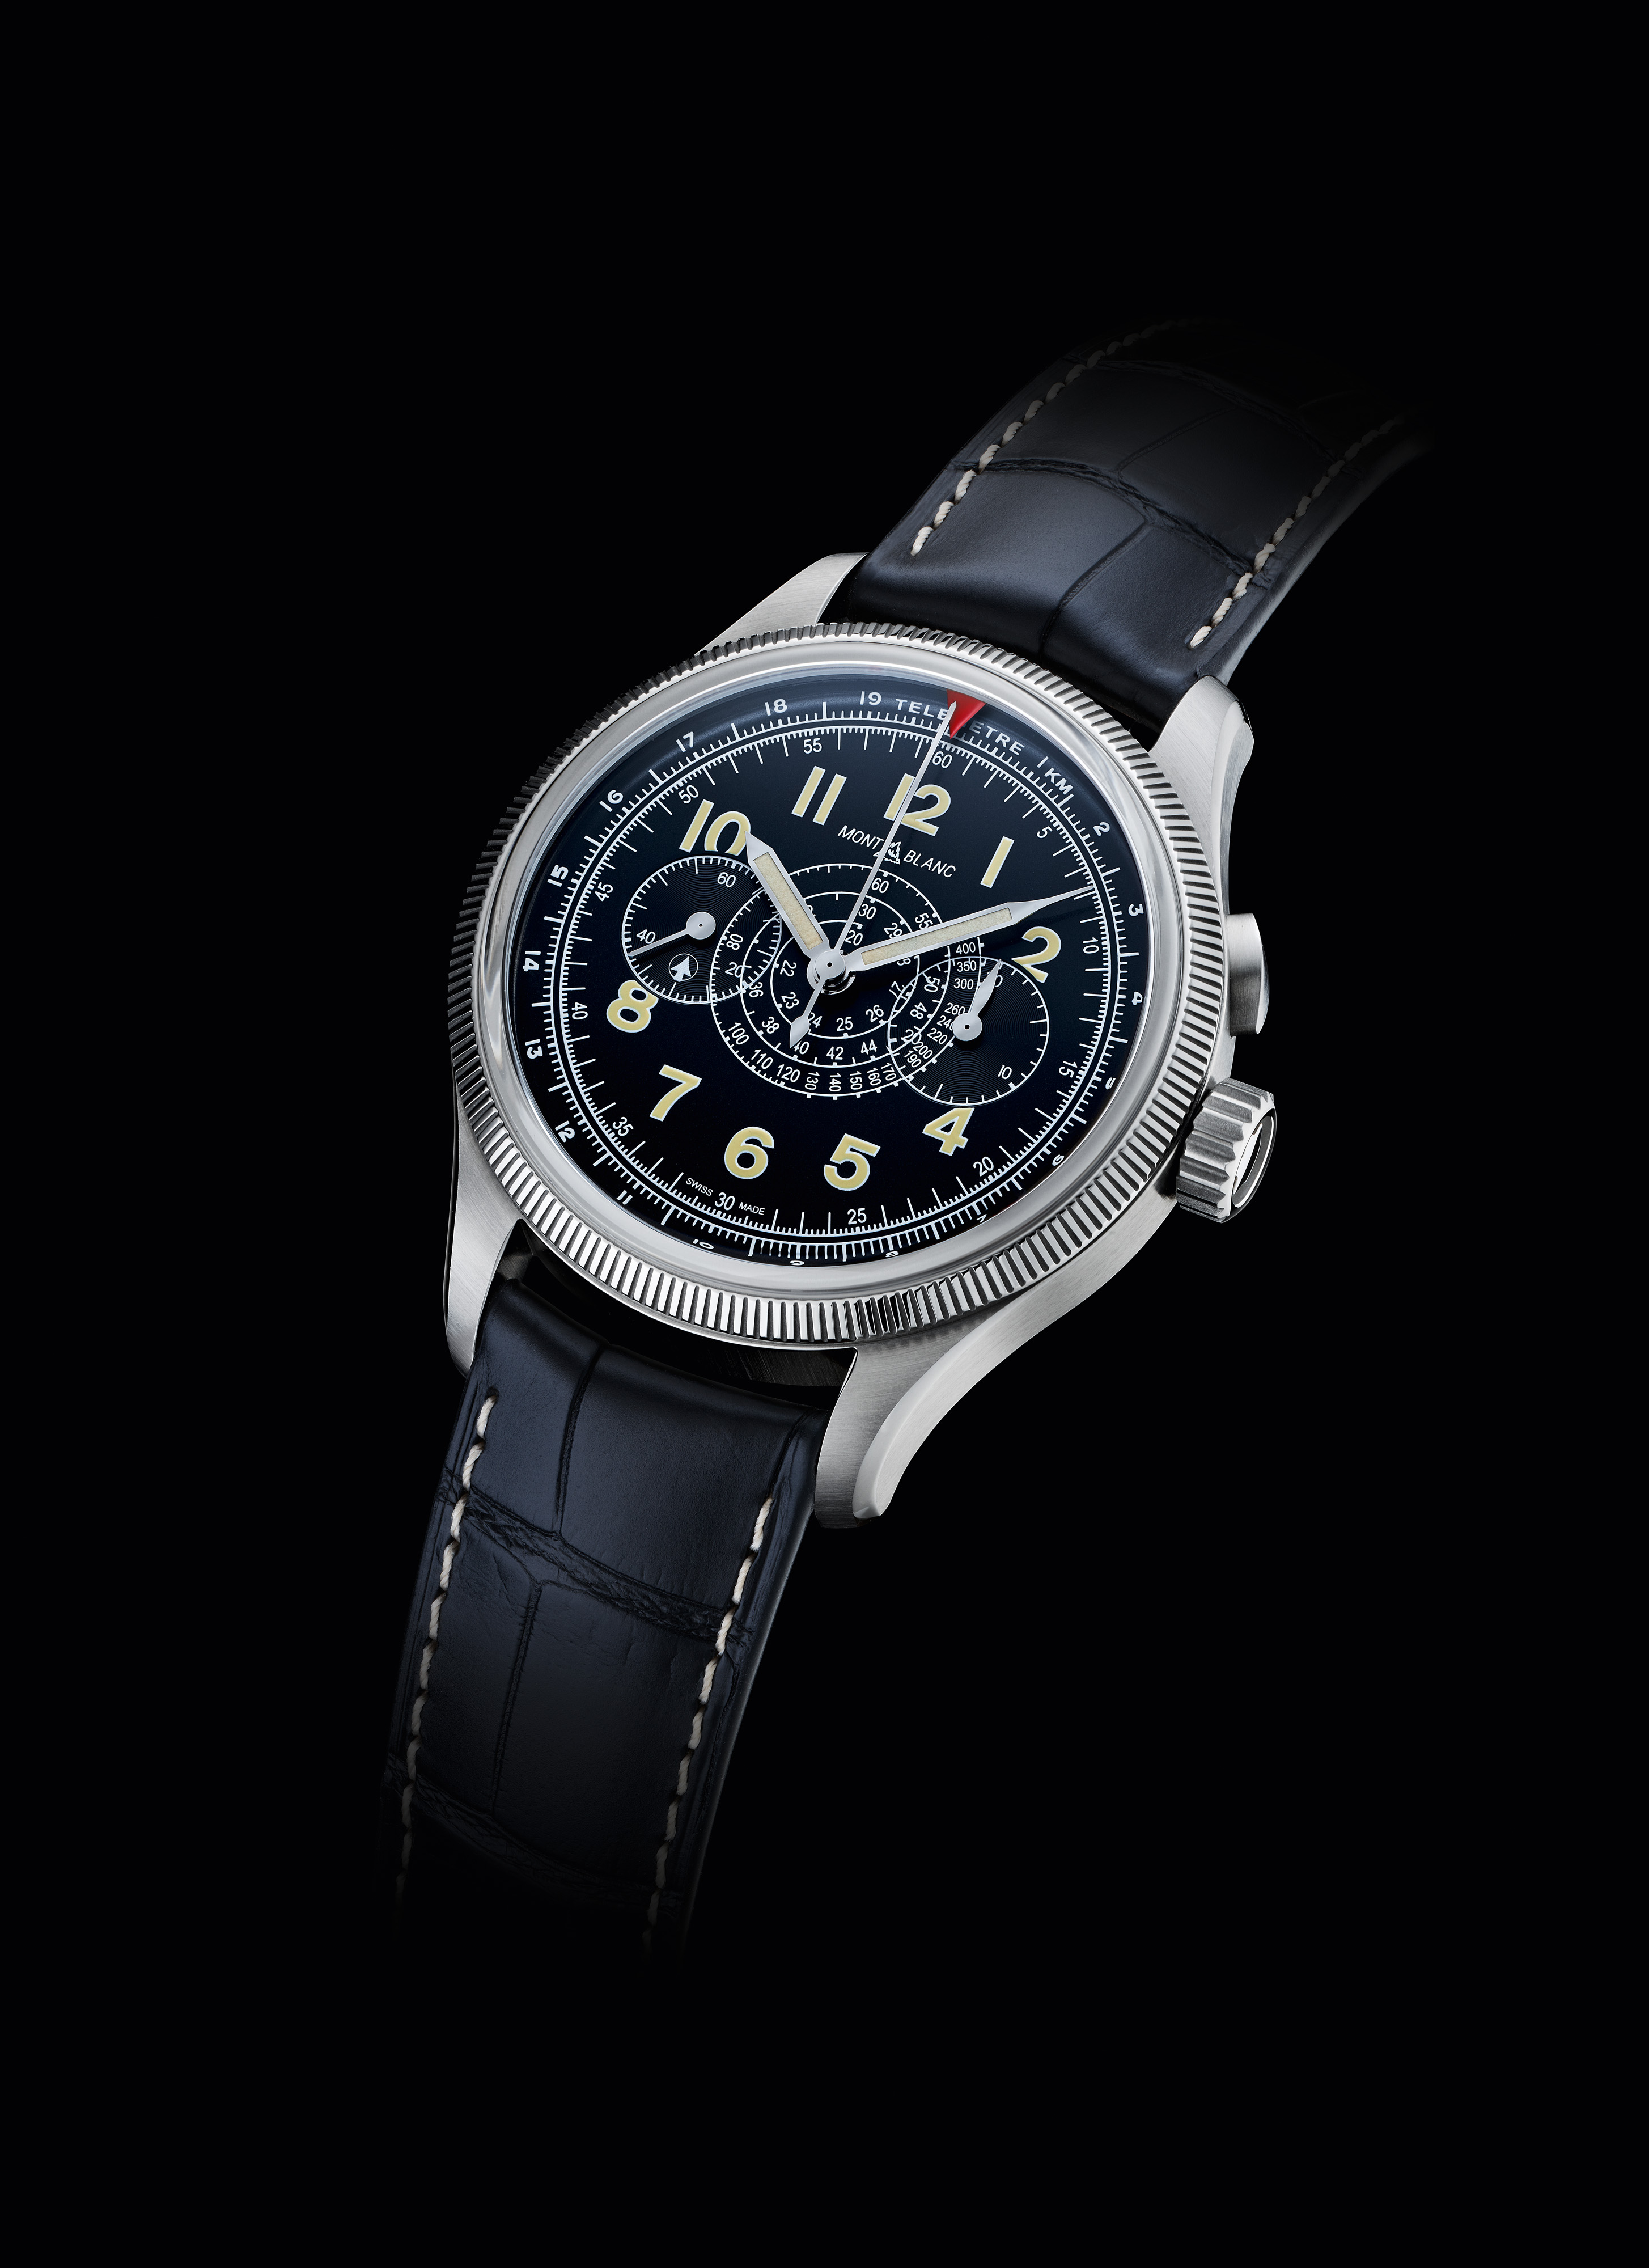 Showing at WatchTime New York 2022: Montblanc Geosphere 0 Oxygen